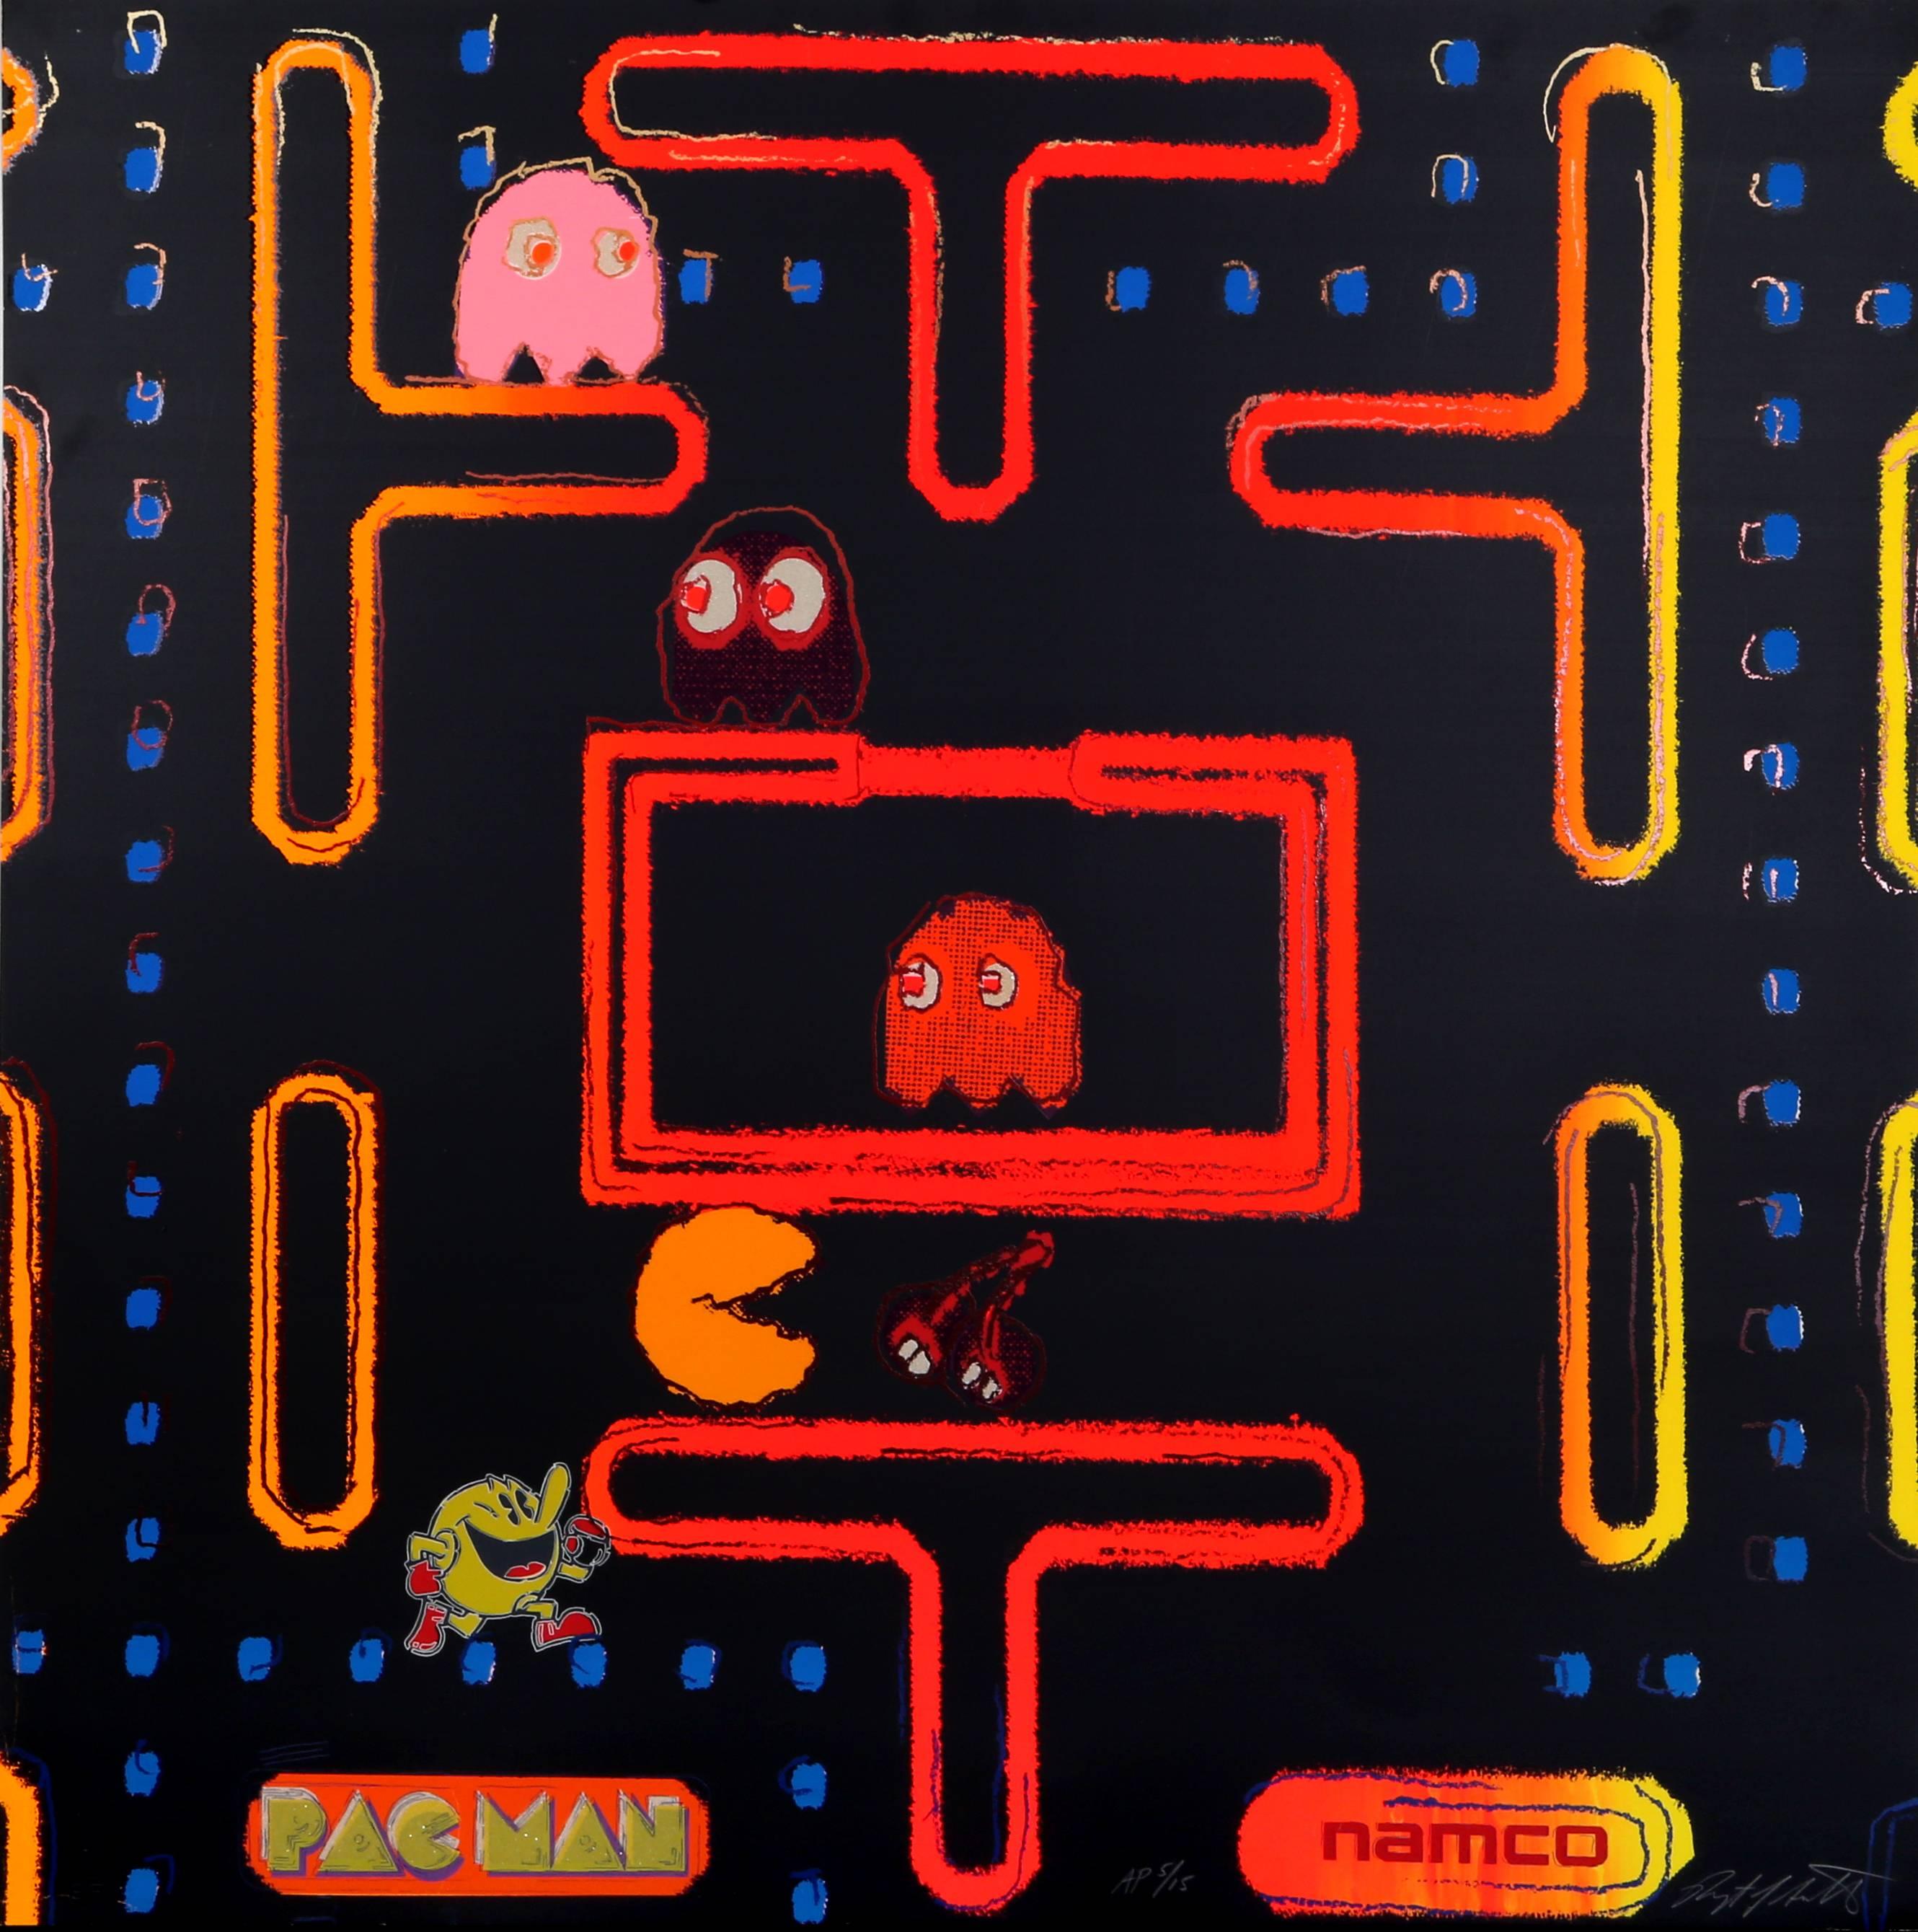 Pac-Man from the Homage to Andy Warhol Portfolio